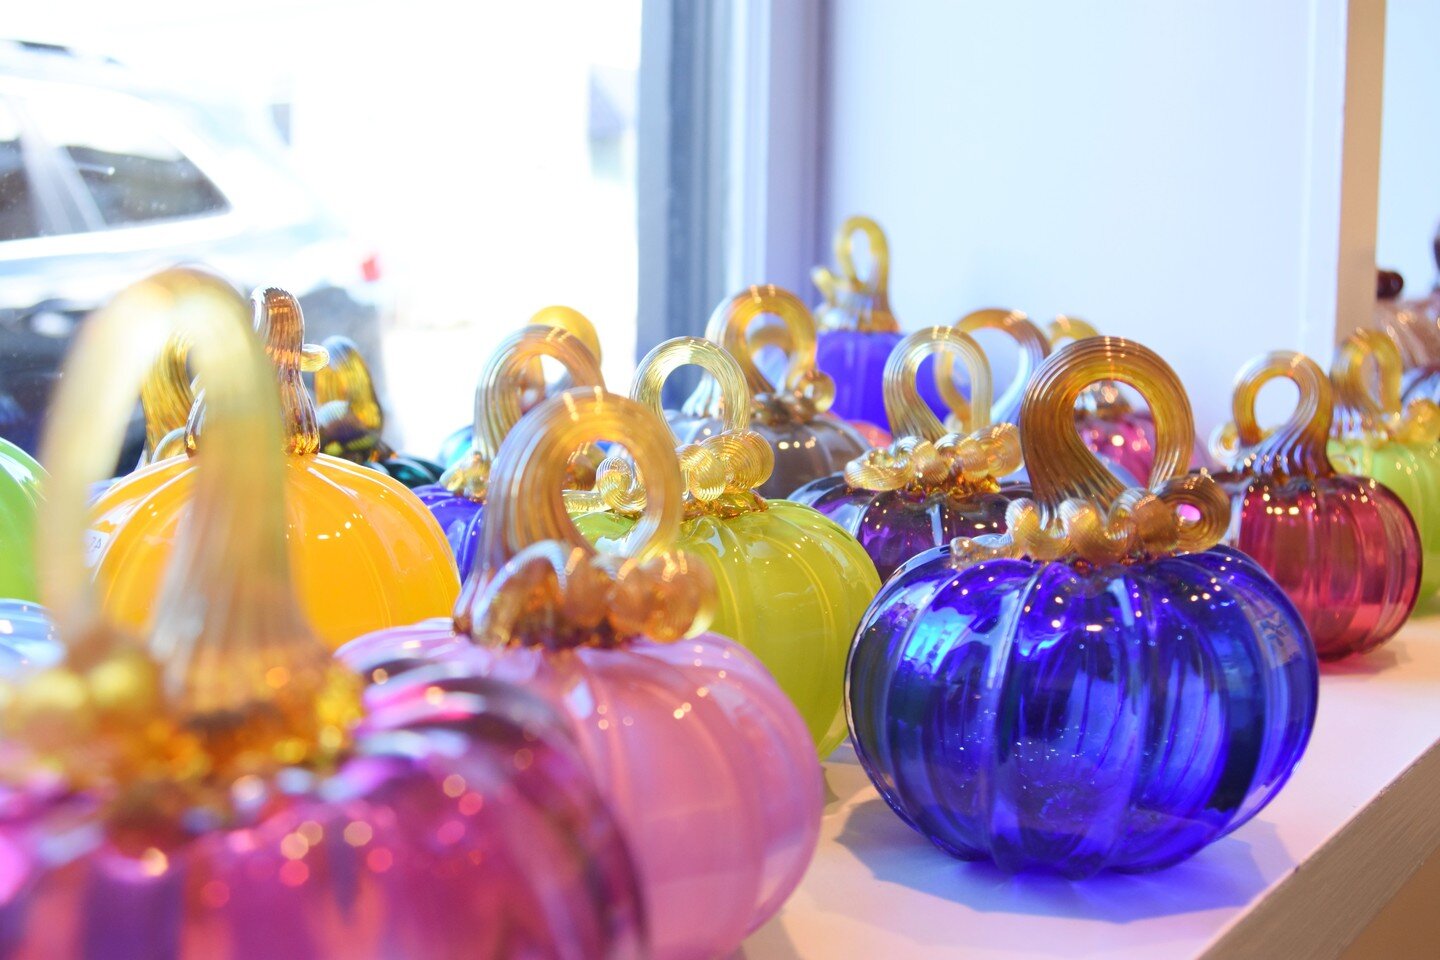 Pumpkins! Pumpkins! Pumpkins! So many to choose from you can't go wrong!